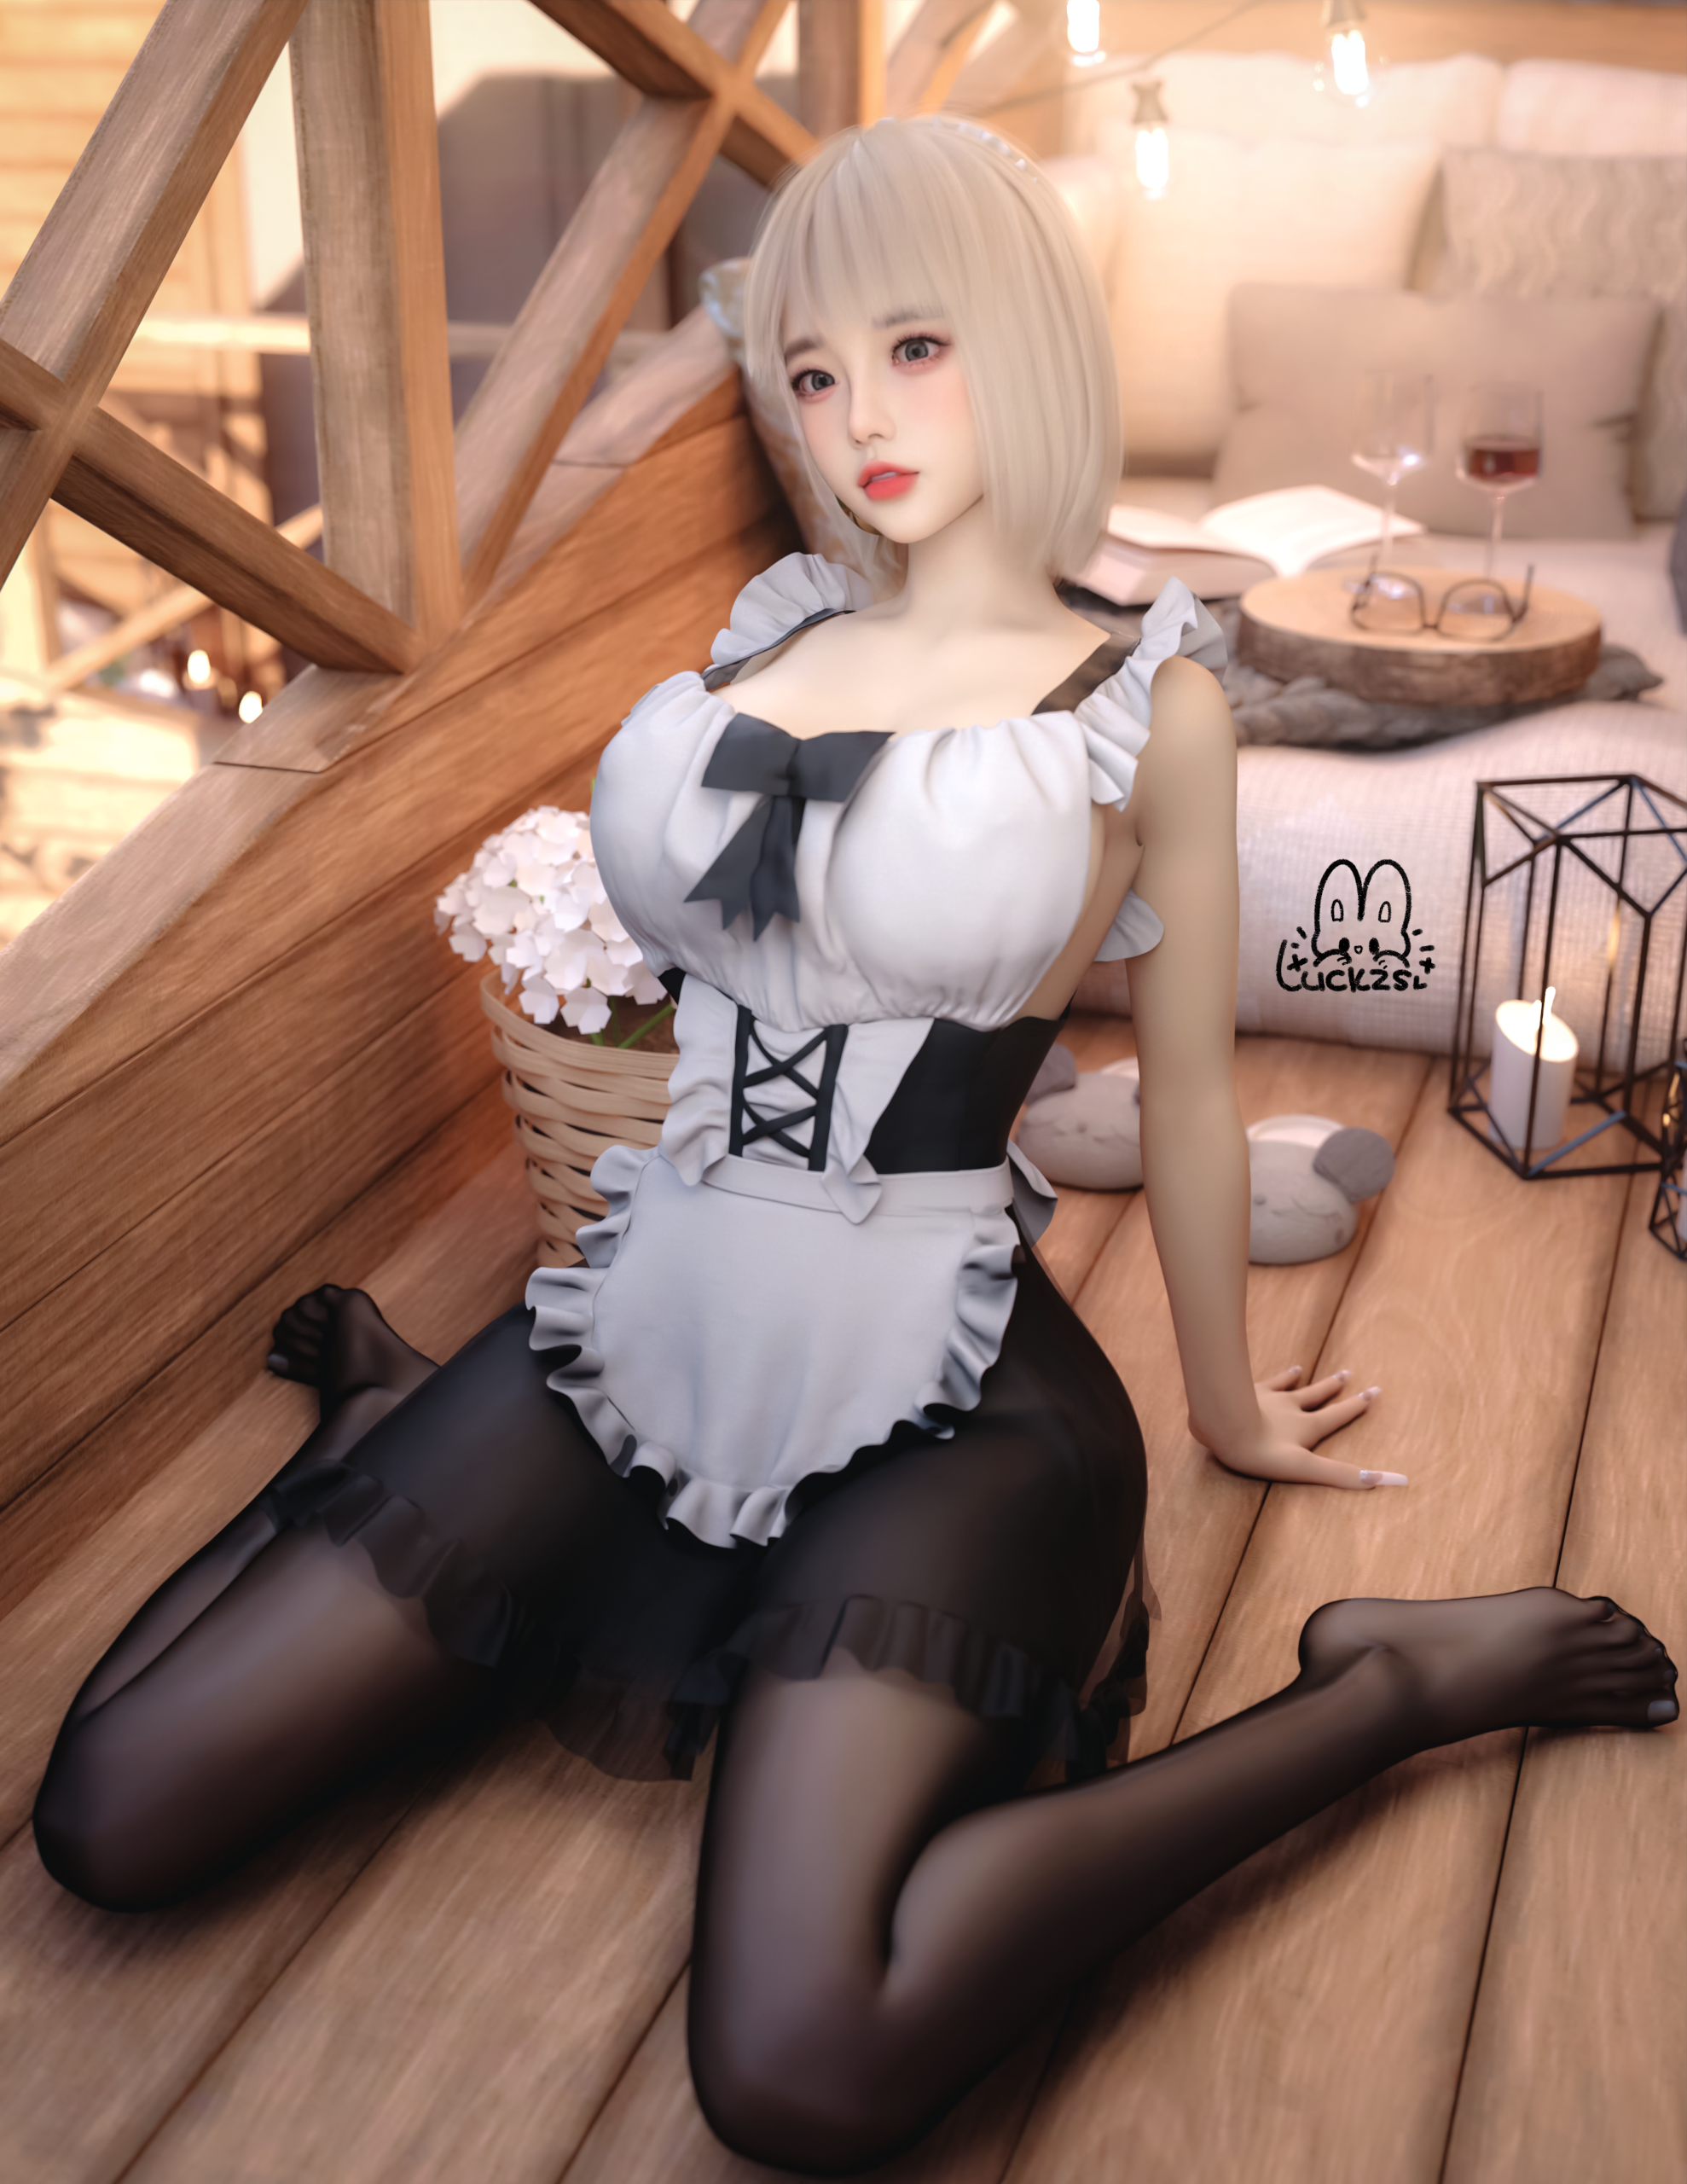 General 1978x2560 maid maid outfit pantyhose Luck zs CGI artwork digital art